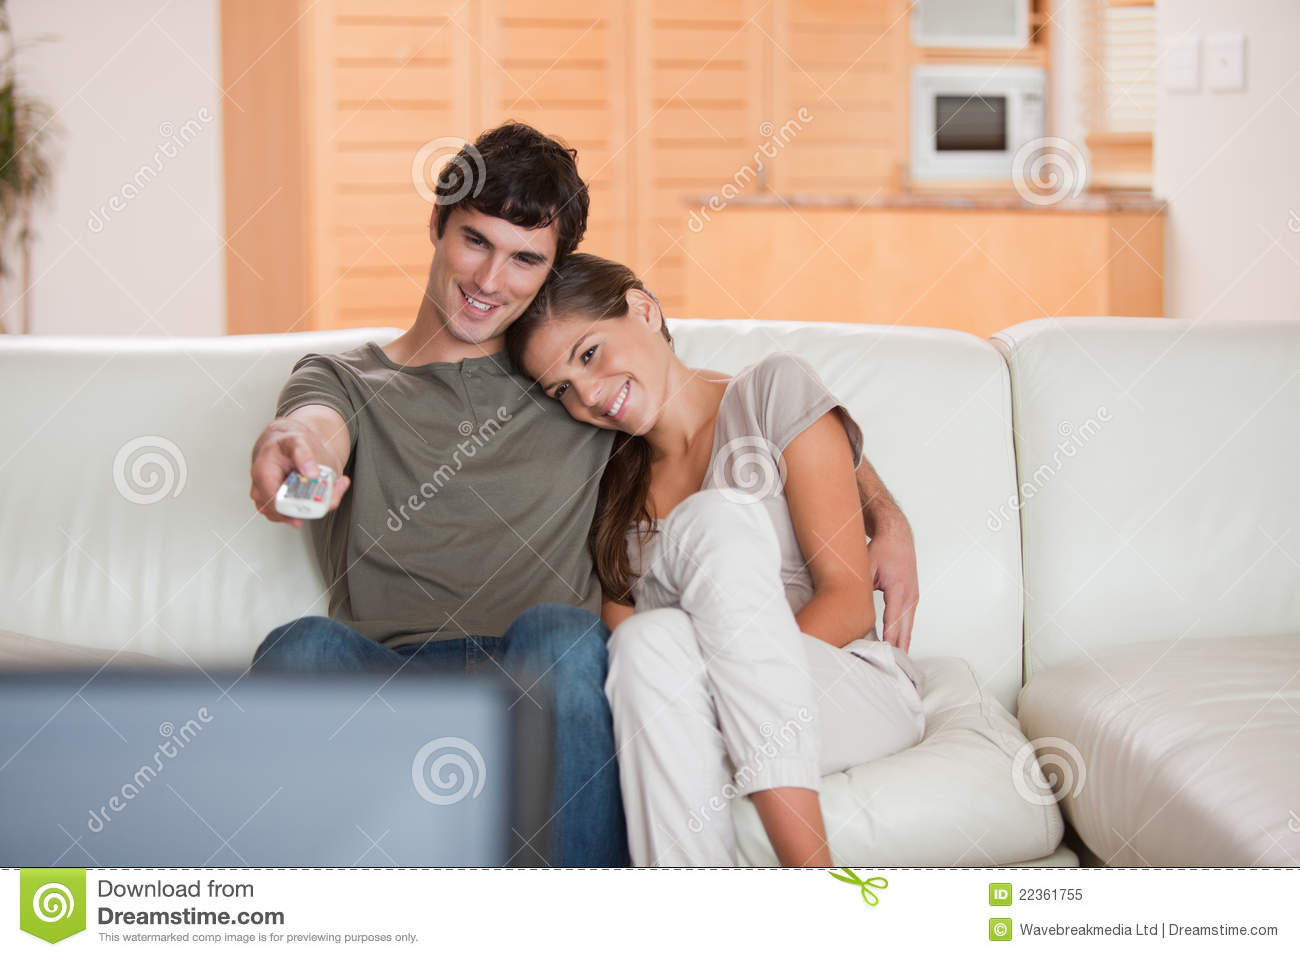 Couple On The Couch Watching Television Together Royalty Free Stock